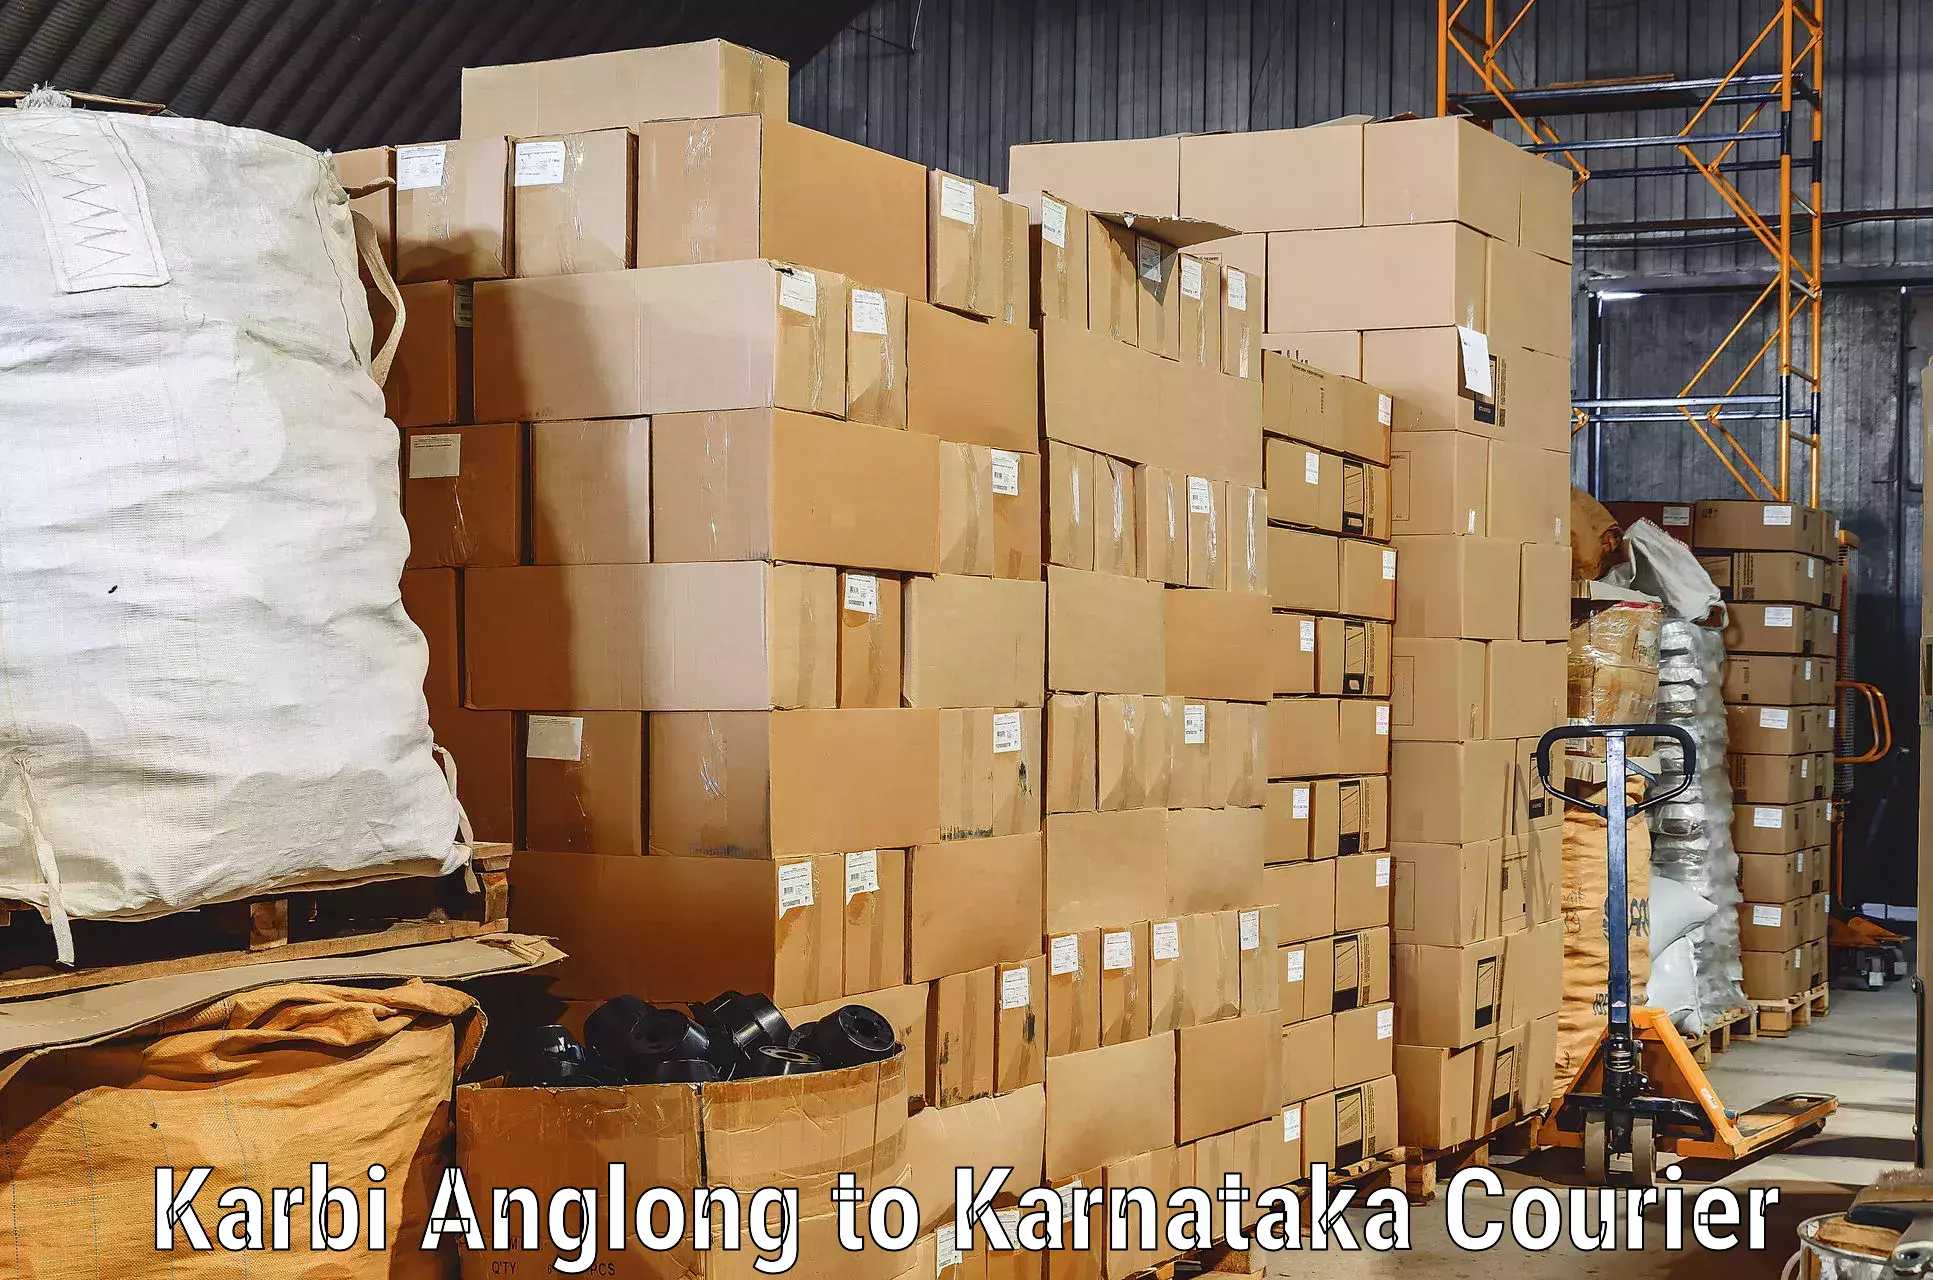 Trusted relocation experts Karbi Anglong to Basavanagudi